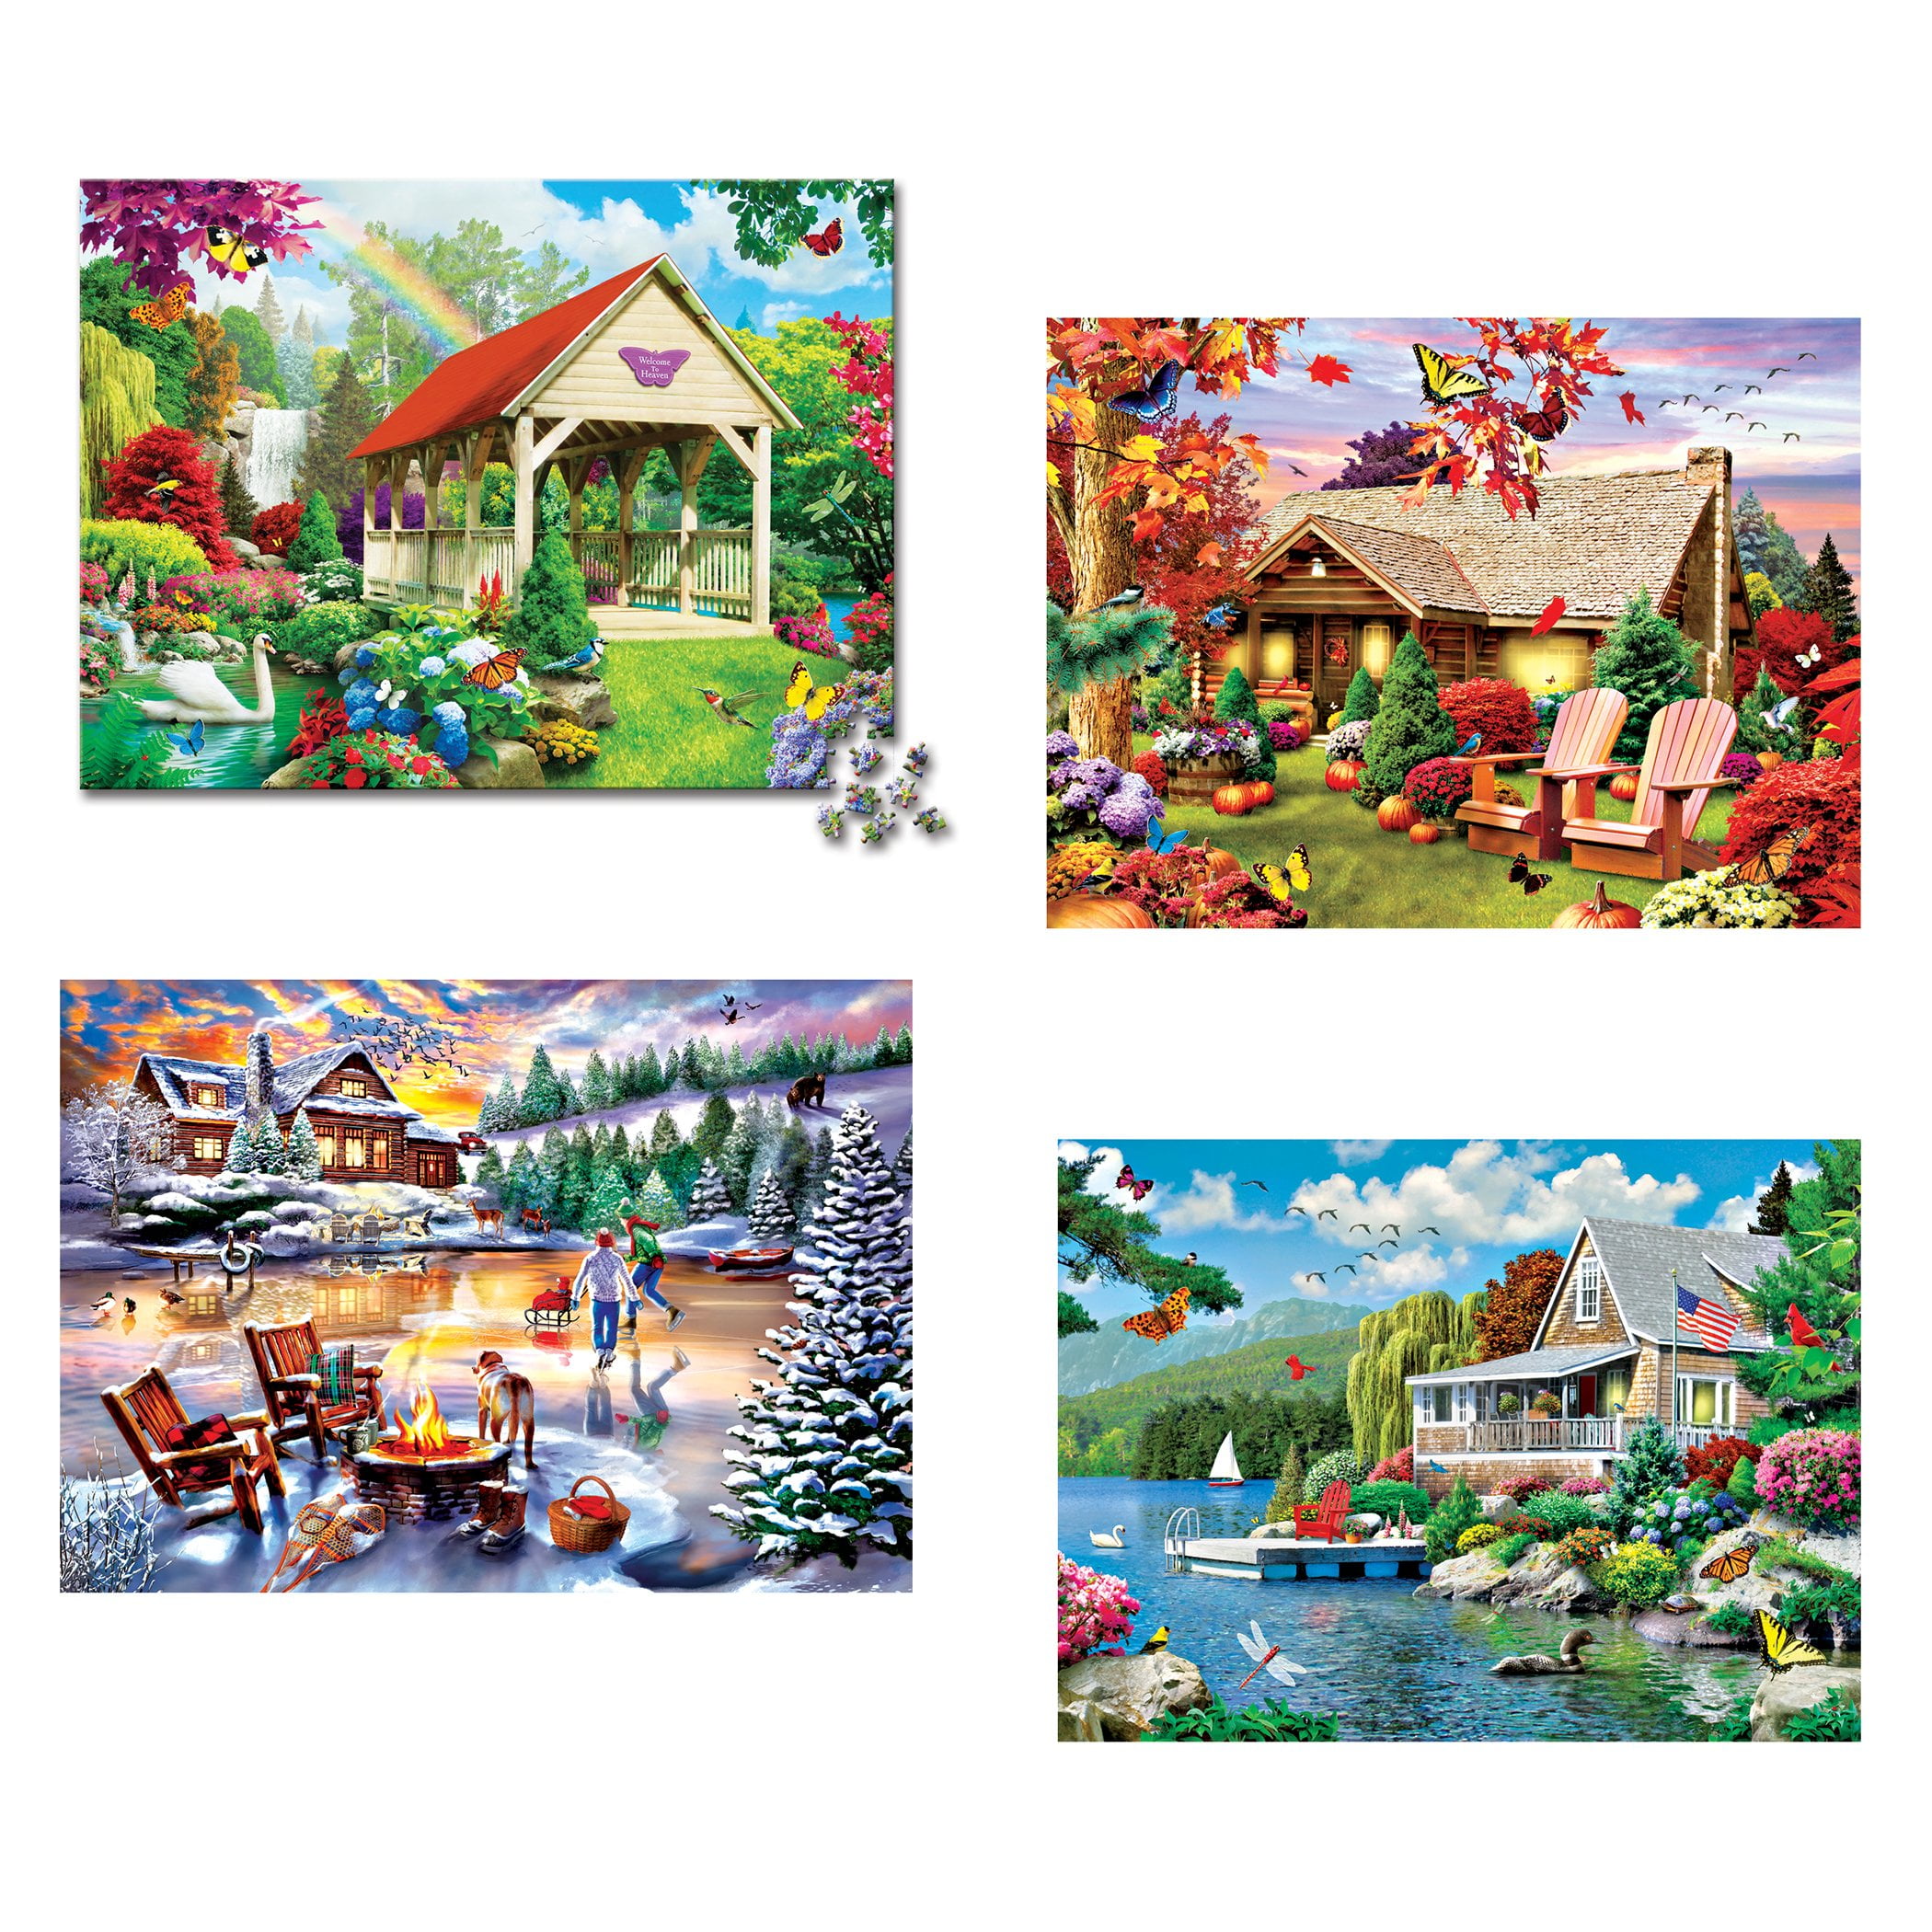 Adult Children's Game for Teenagers 5000 Piece Puzzle Abstract Art Flower Girl Figure Game Educational Intellectual Family